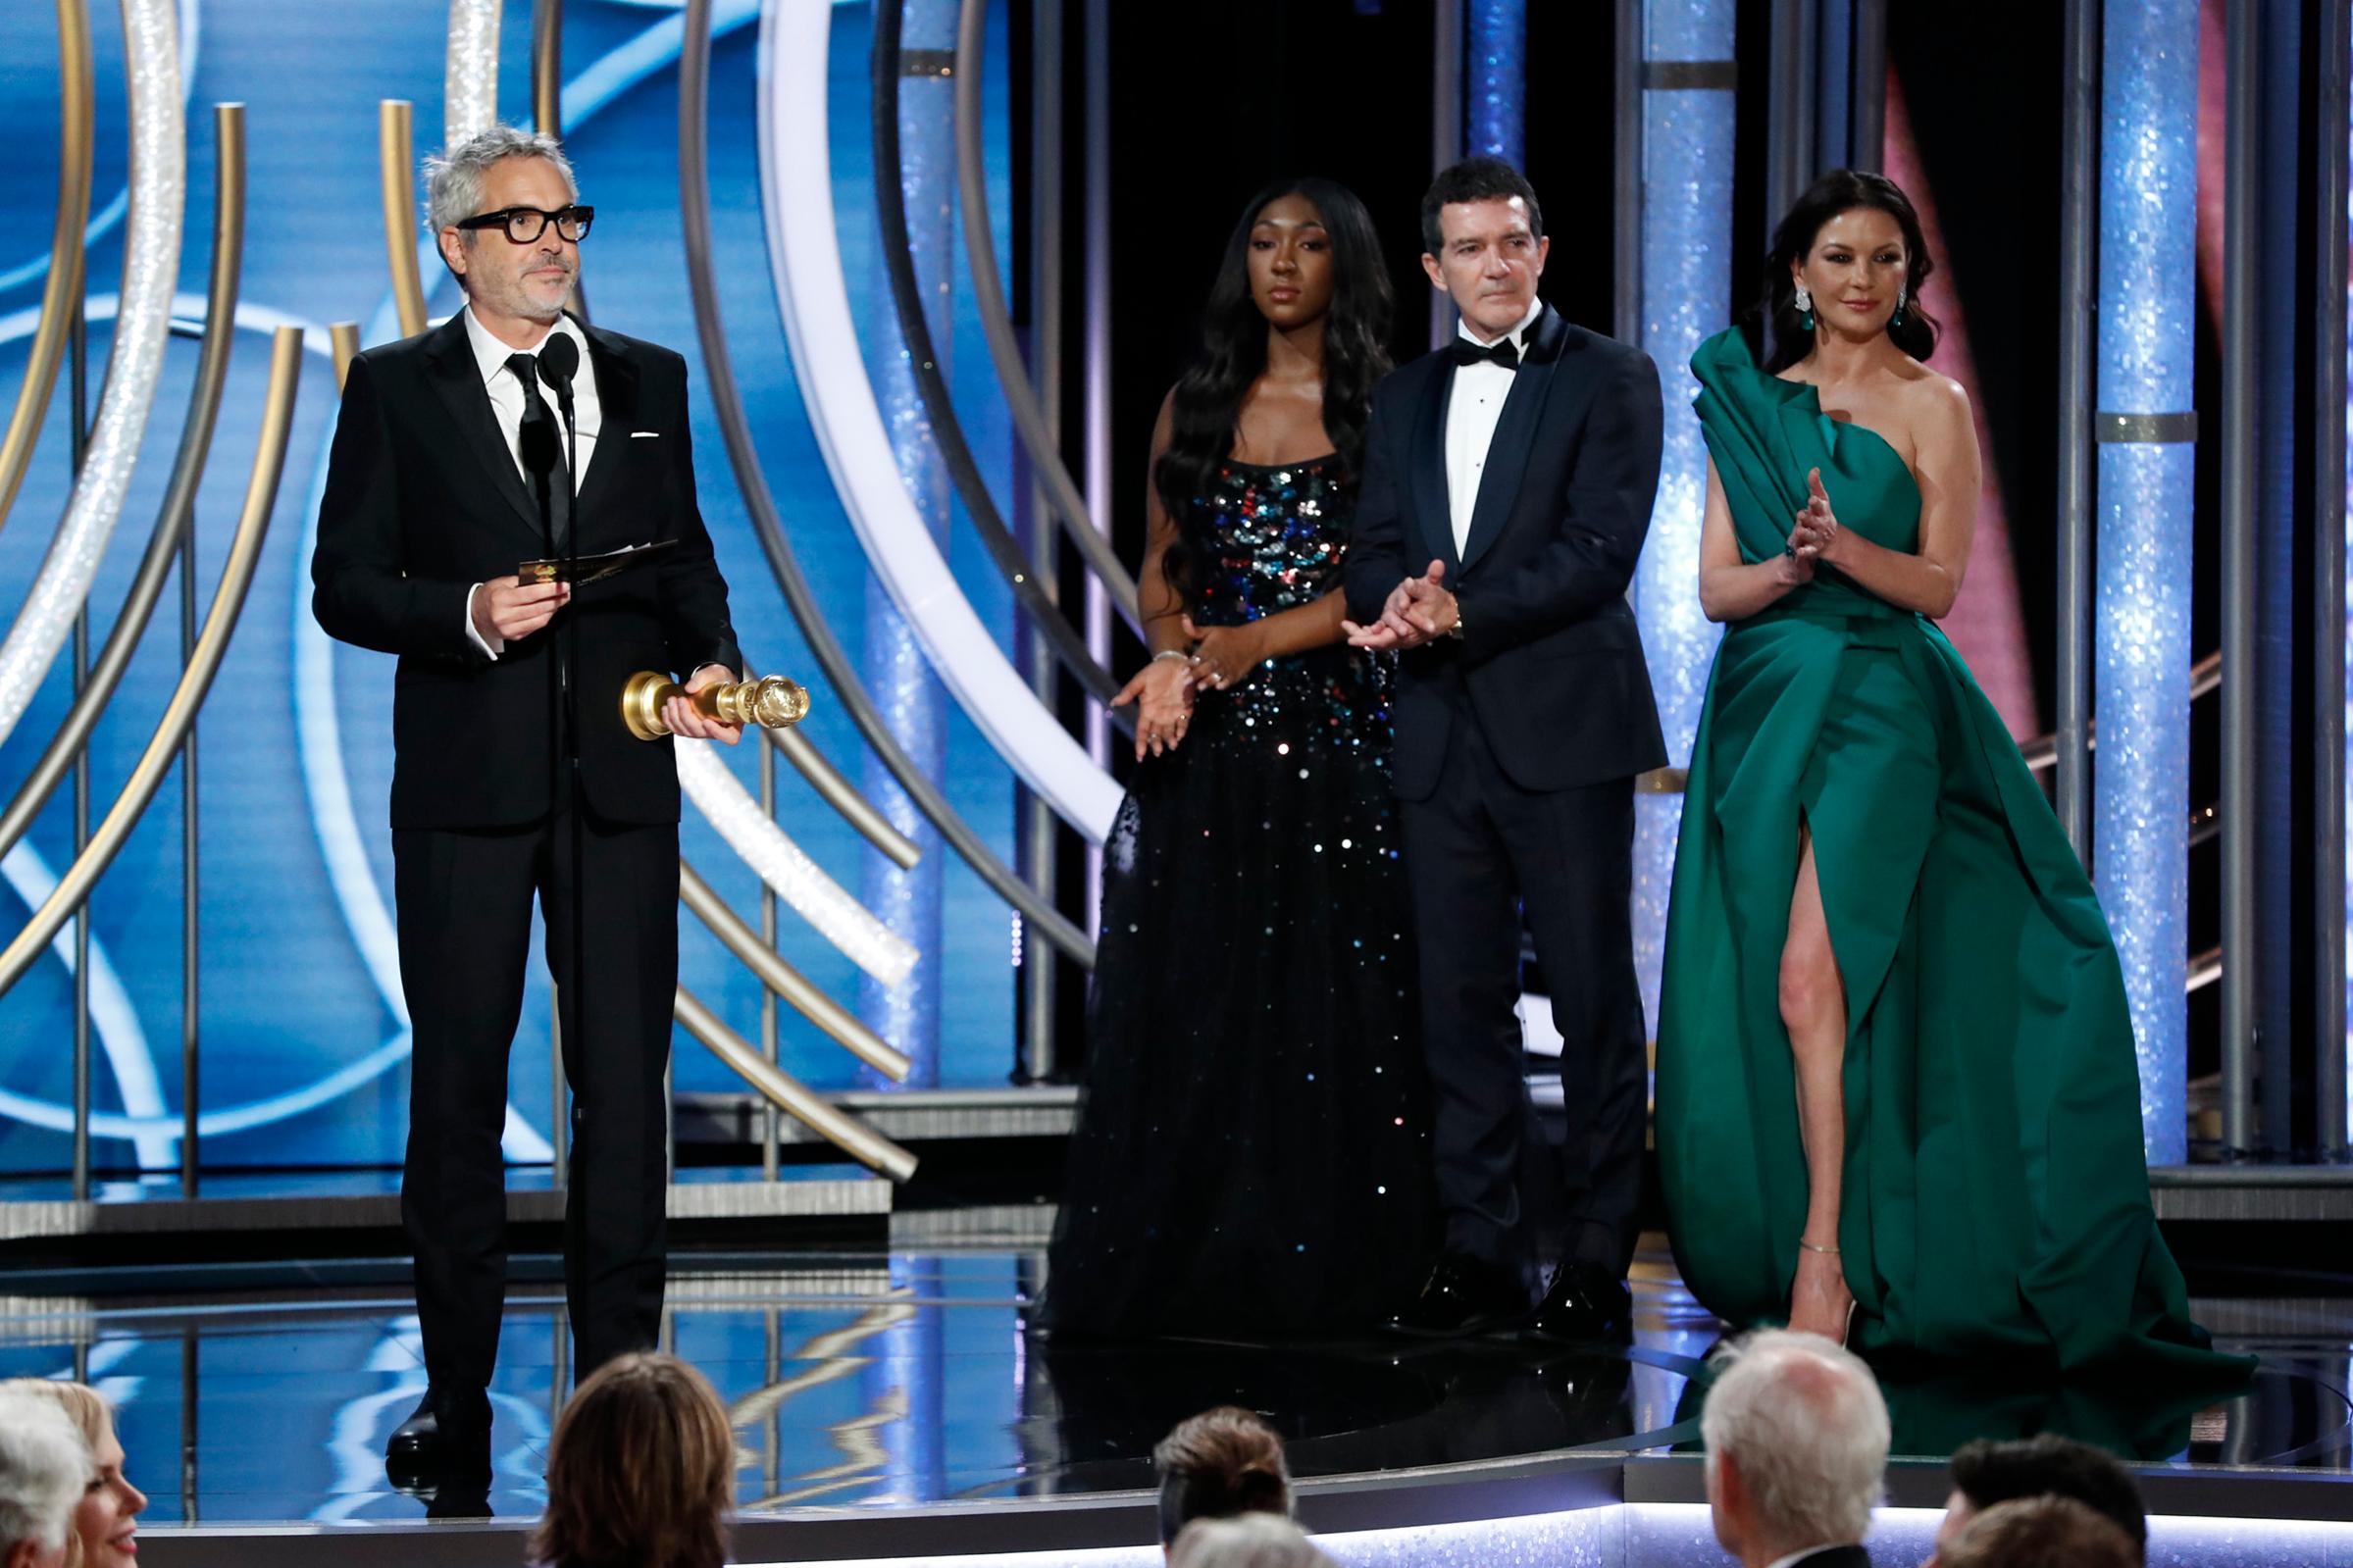 Alfonso Cuaron of “Roma” accepts the an award onstage during the 76th Annual Golden Globe Awards.